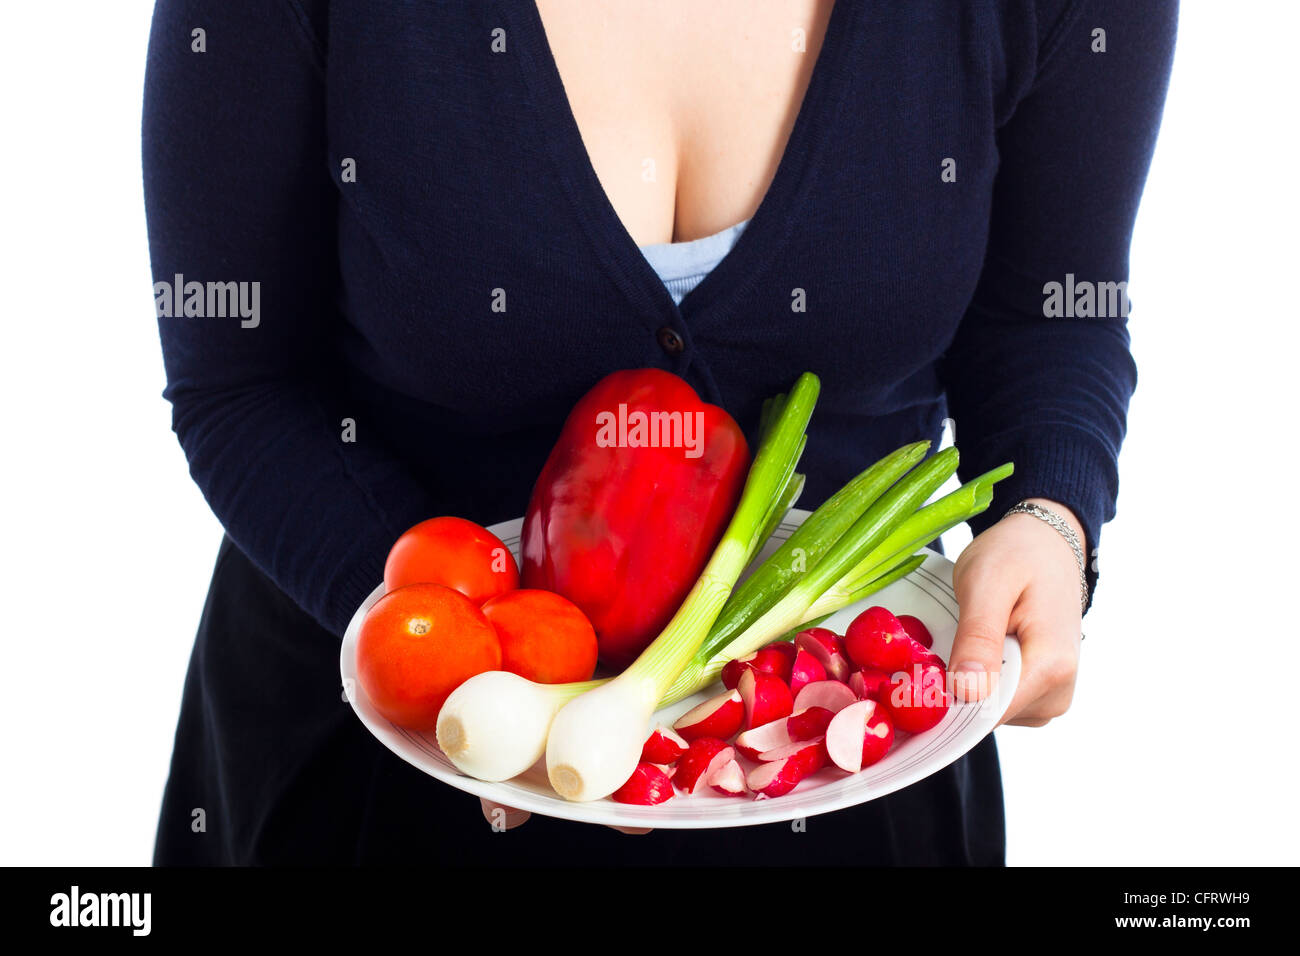 Detail of woman holding plate with fresh vegetable, isolated on white background. Stock Photo